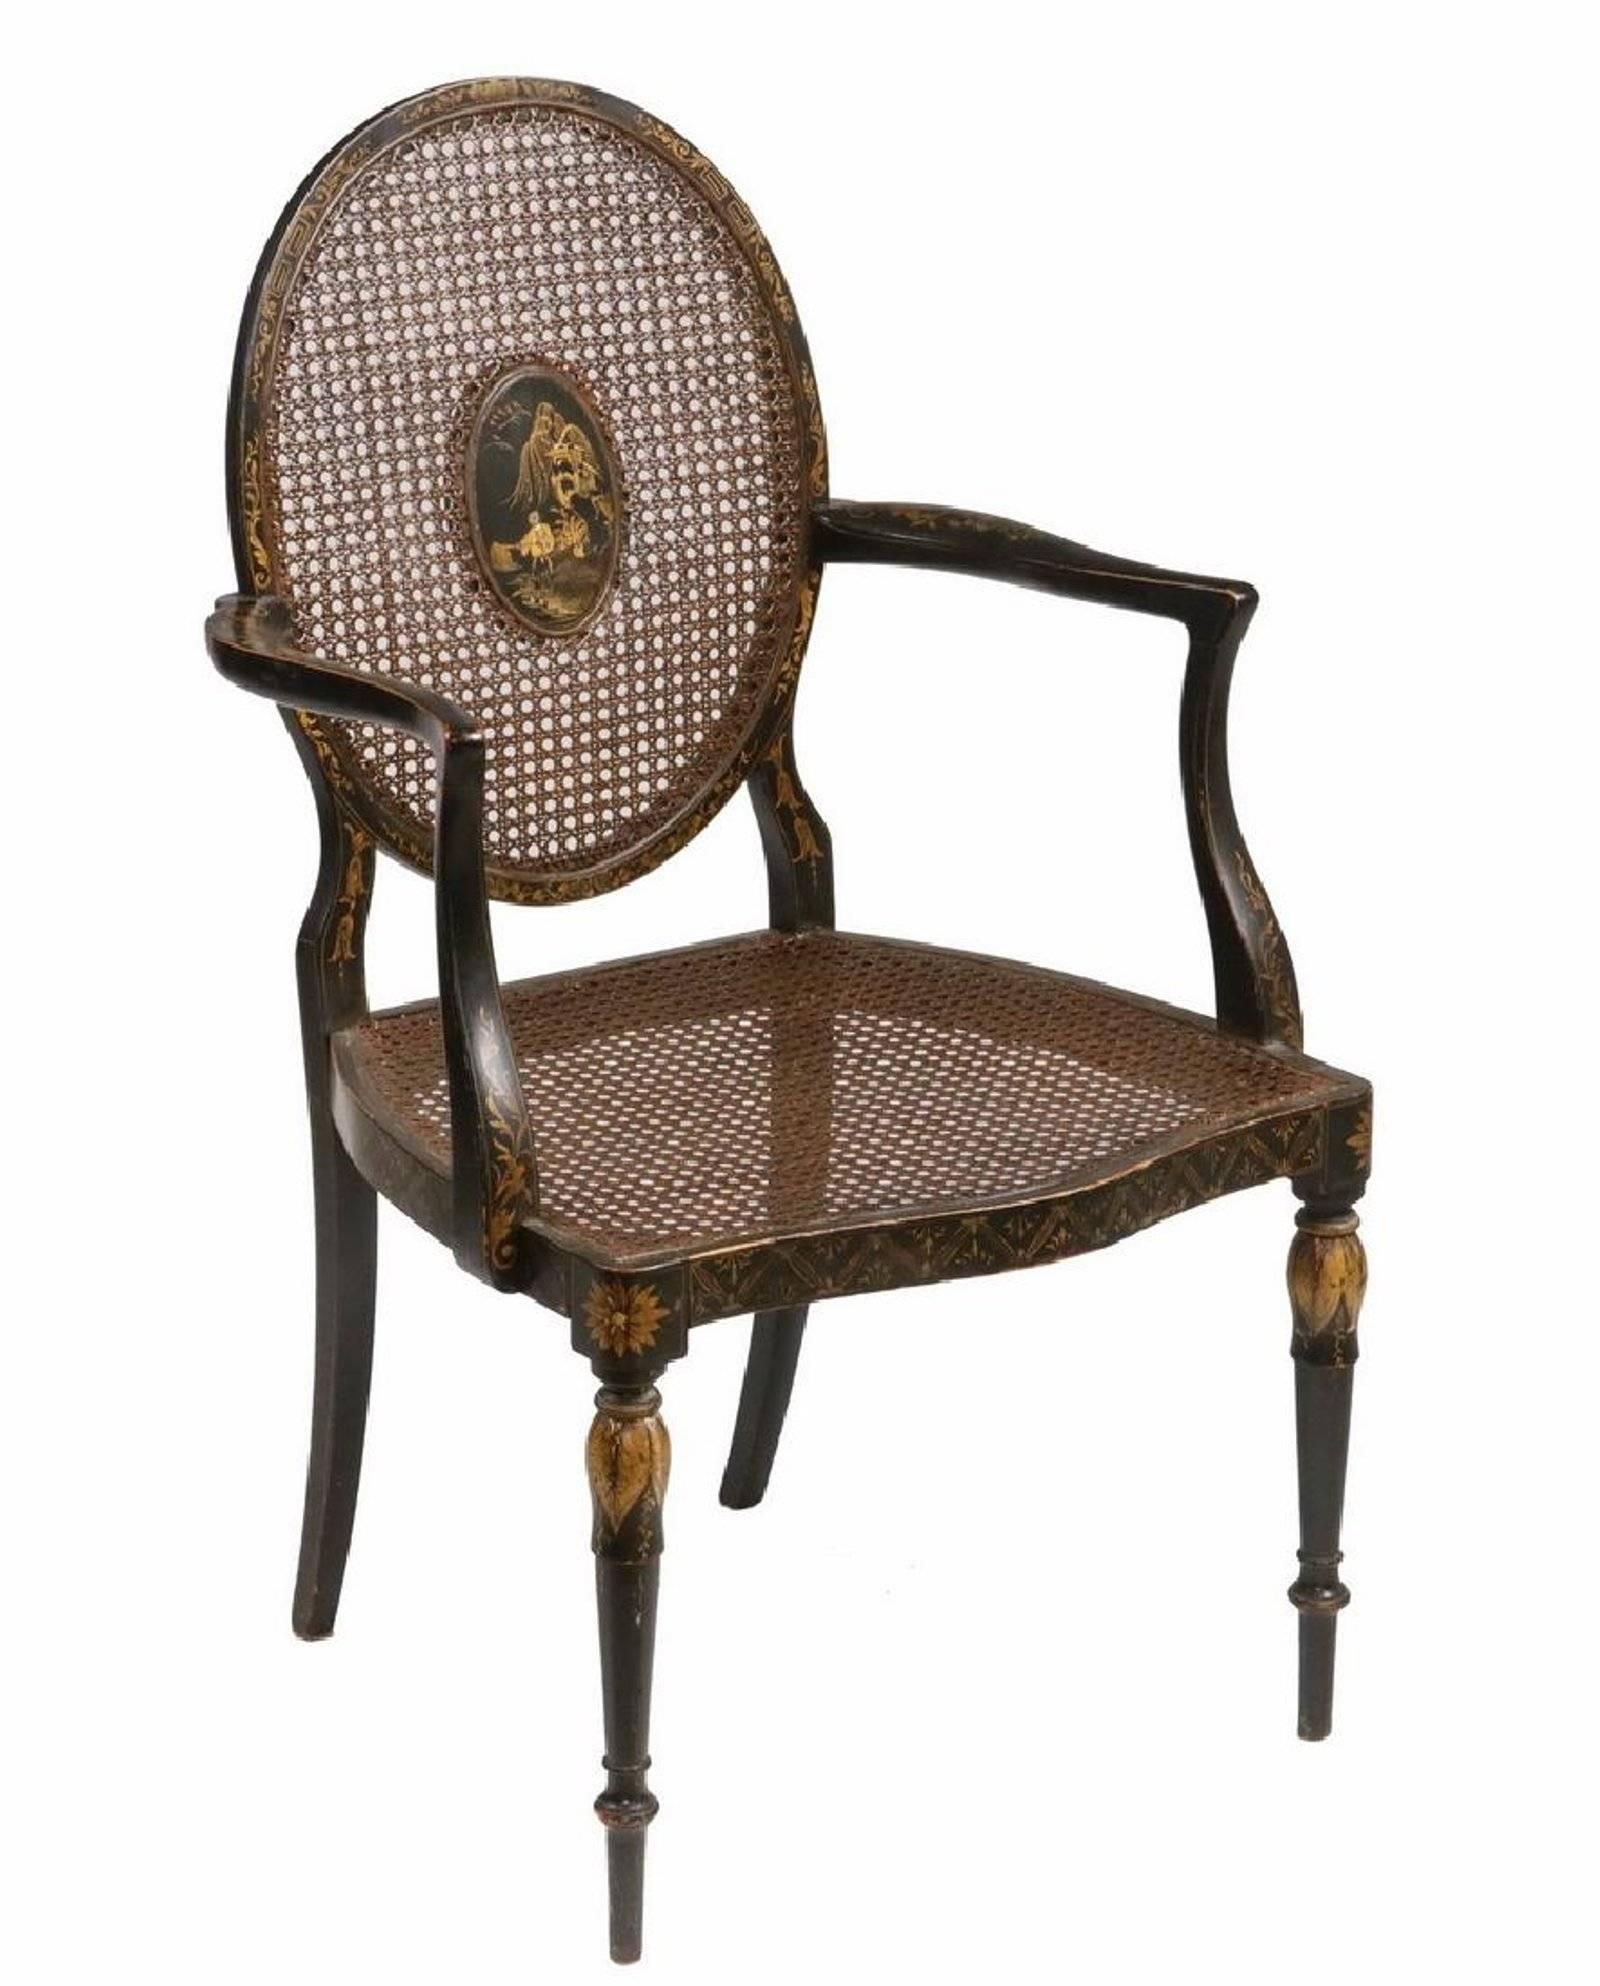 19th century English black lacquered chinoiserie armchair, caned seat and back, centre medallion.